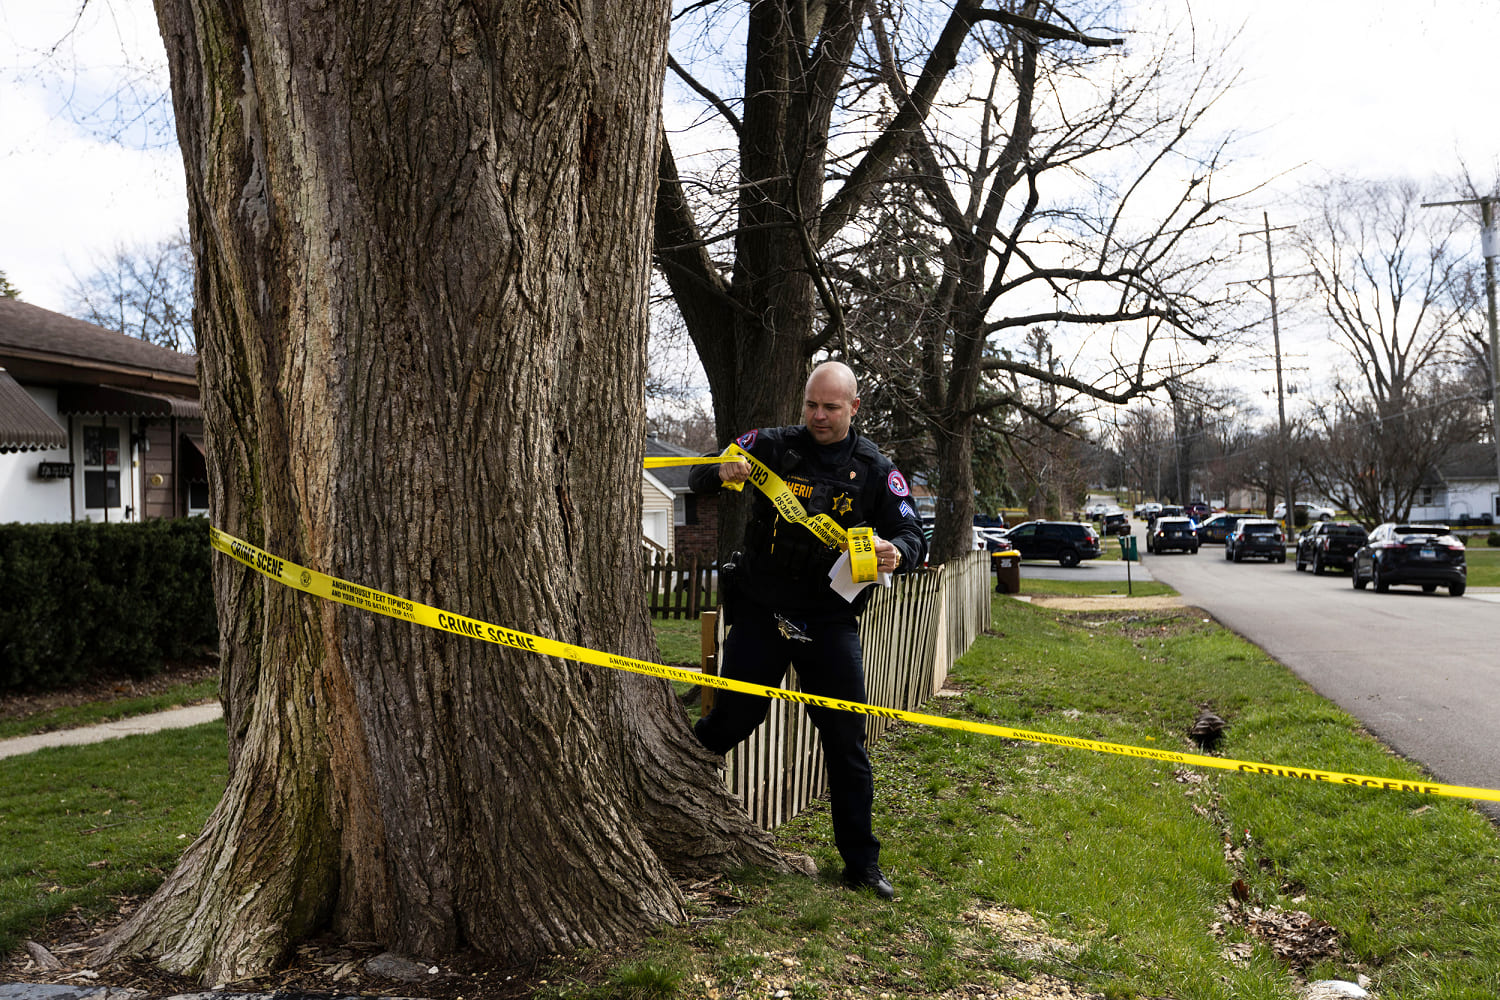 4 dead and 7 wounded in Illinois stabbing rampage; suspect, 22, in custody